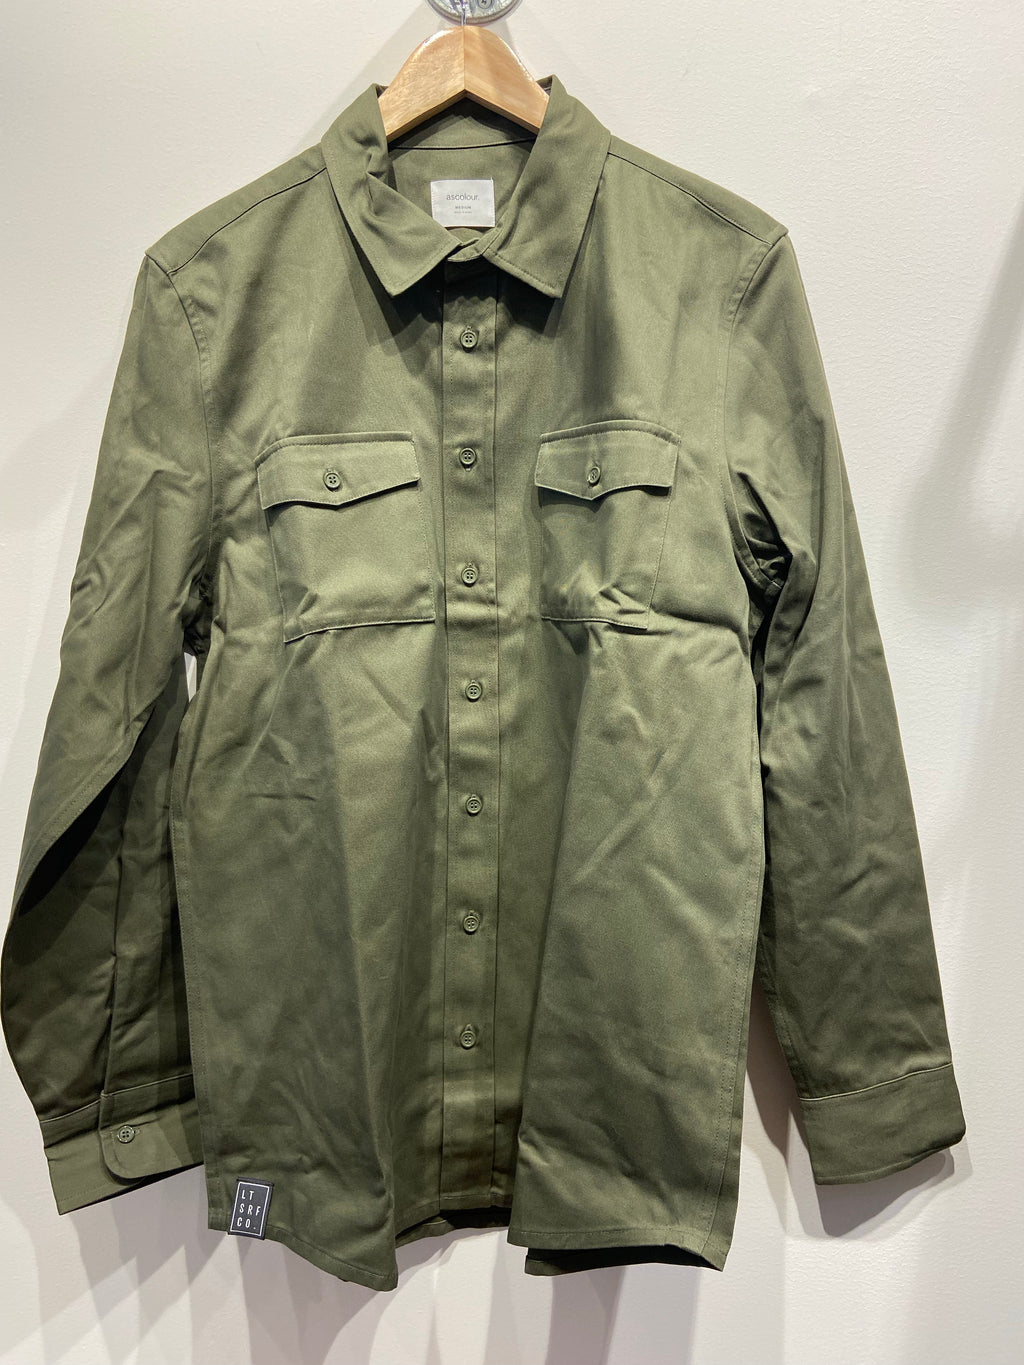 LTSC Military Button Up